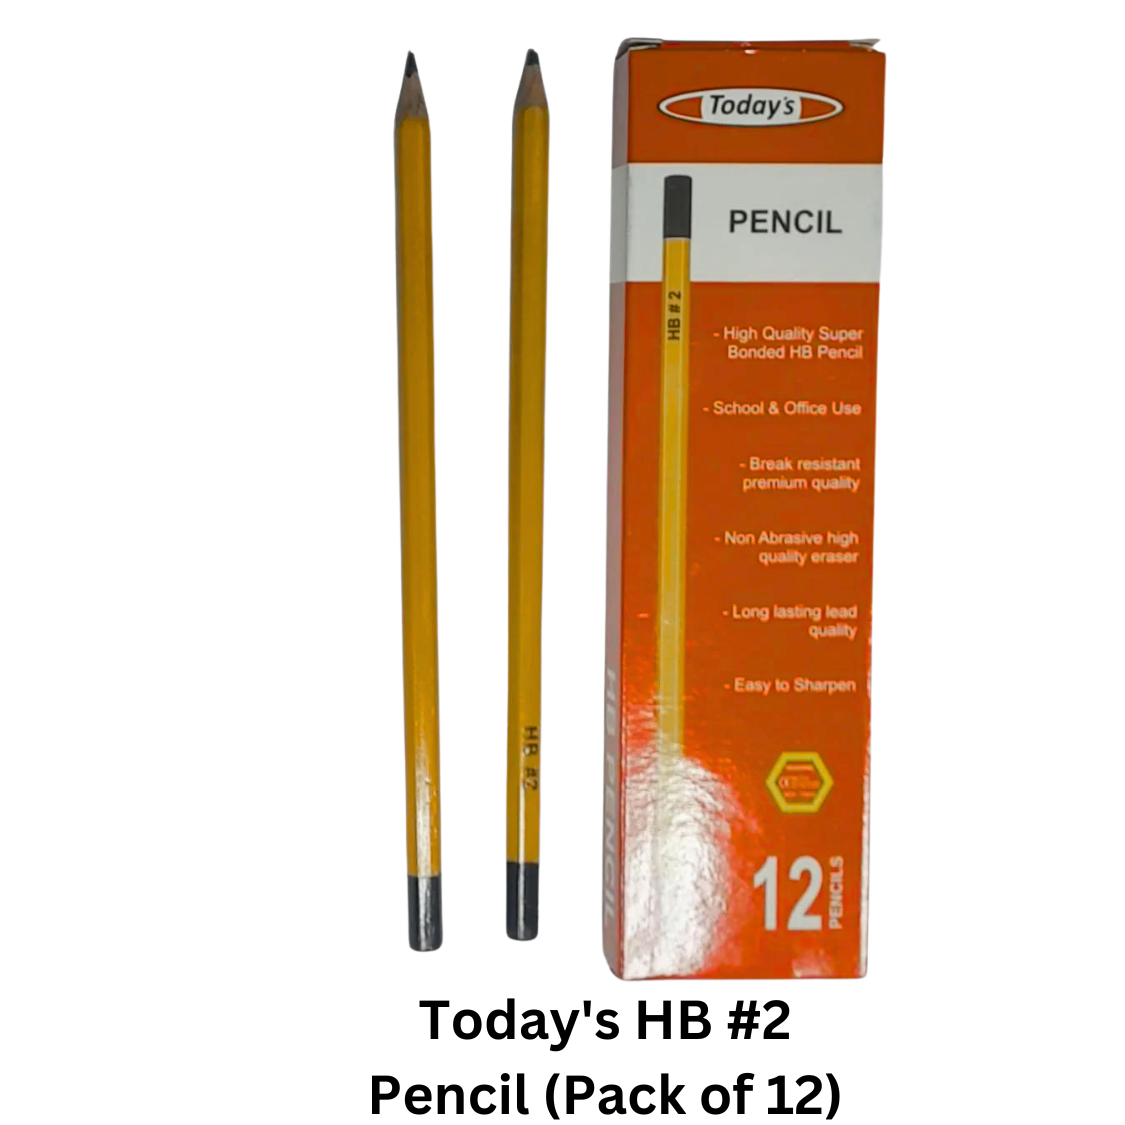 Today's HB #2 Pencil (Pack of 12)